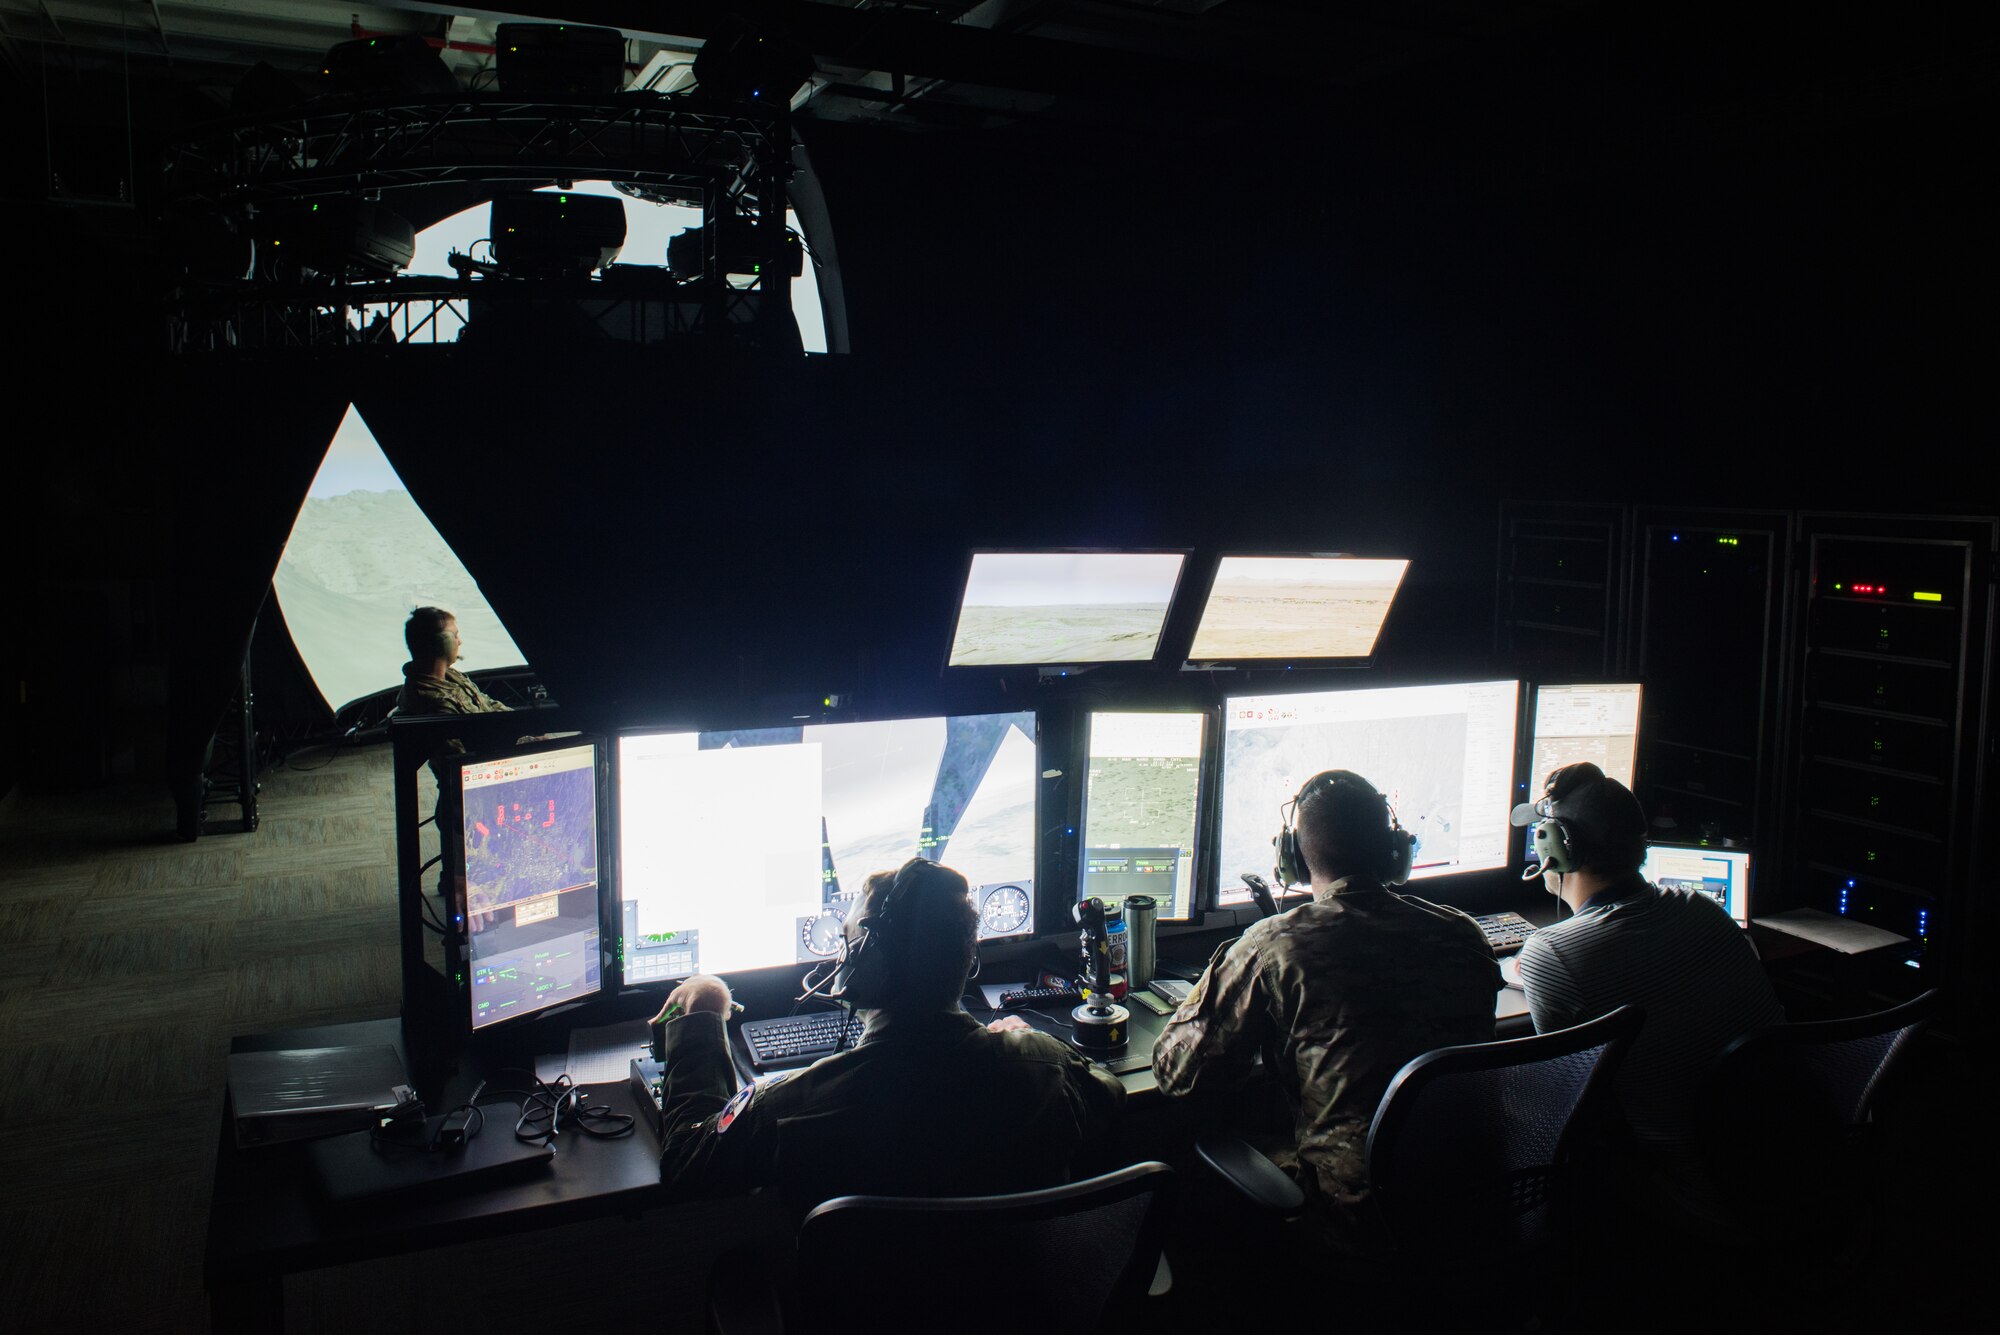 Instructors operate a 138th Combat Training Flight Air National Guard Advanced Joint Terminal Attack Control Simulator while a Tactical Air Control Party specialist calls in an airstrike during a simulated mission at Will Rogers Air National Guard Base in Oklahoma City, May 9, 2018. The simulator has saved the Air National Guard and Air Combat Command both time and money while ensuring the readiness of battlefield Airmen. (U.S. Air National Guard photo by Staff Sgt. Tyler Woodward)